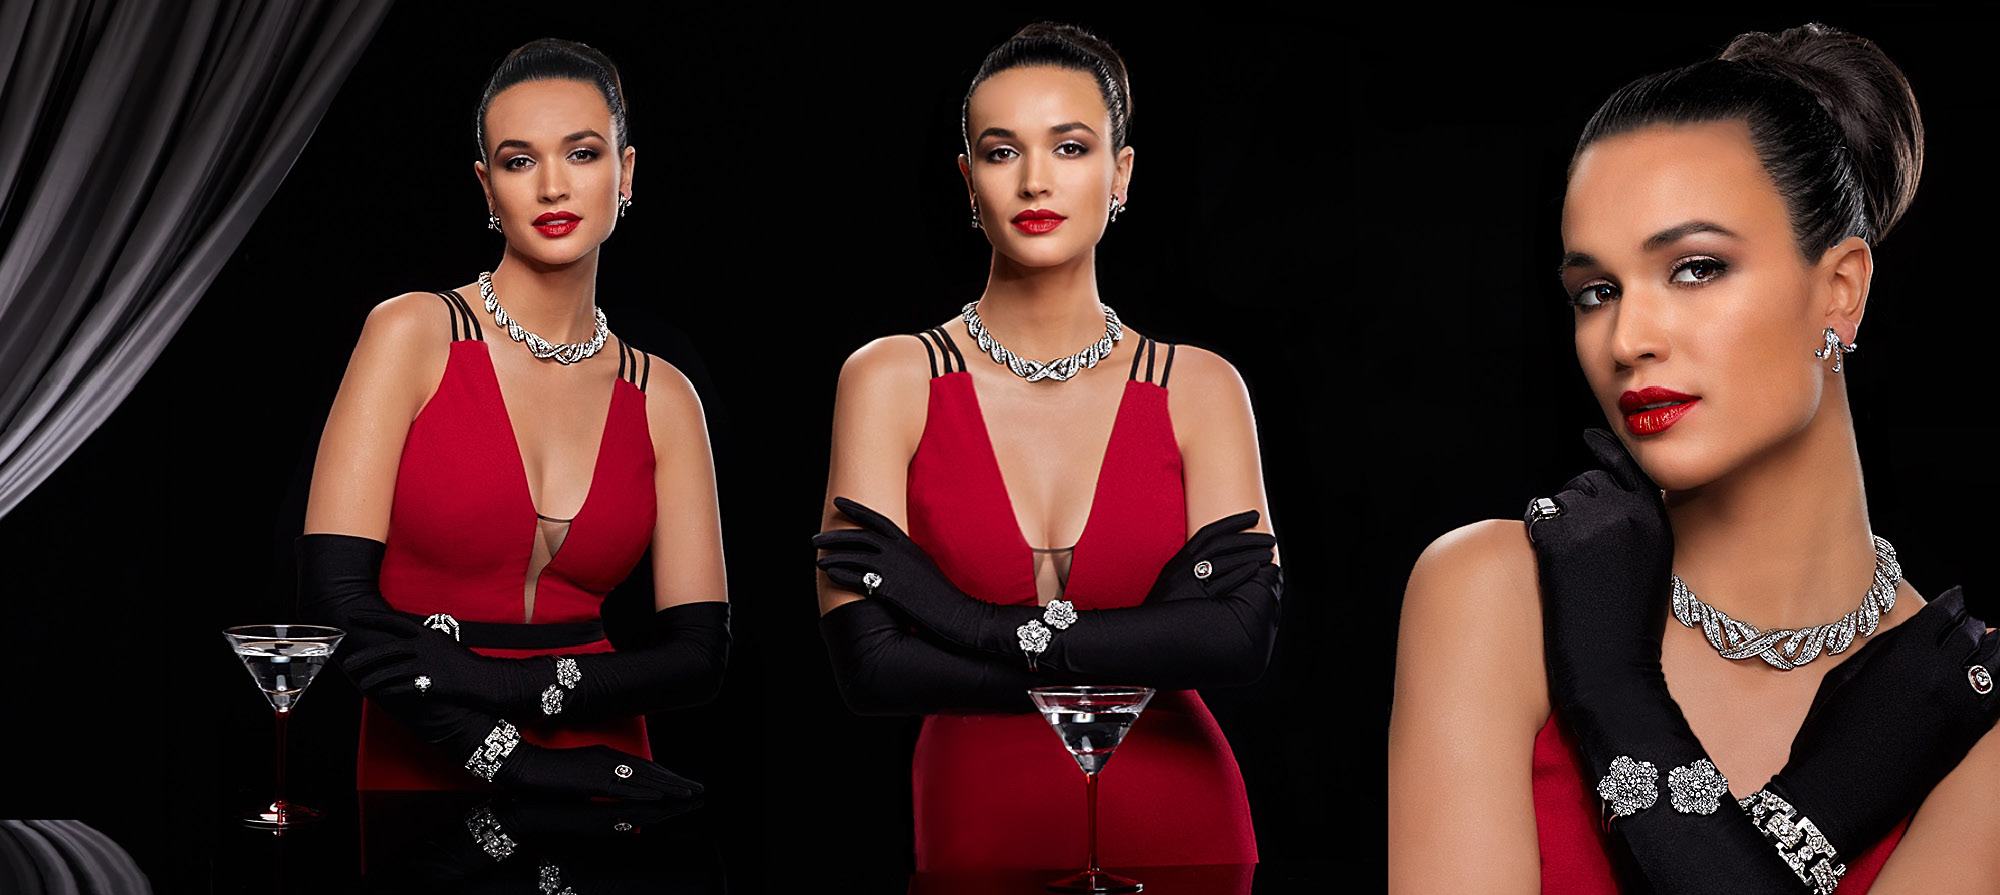 Image of same women standing with a martini in front of her in three different poses wearing red dress diamond earrings, necklace, bracelets and rings with a black background